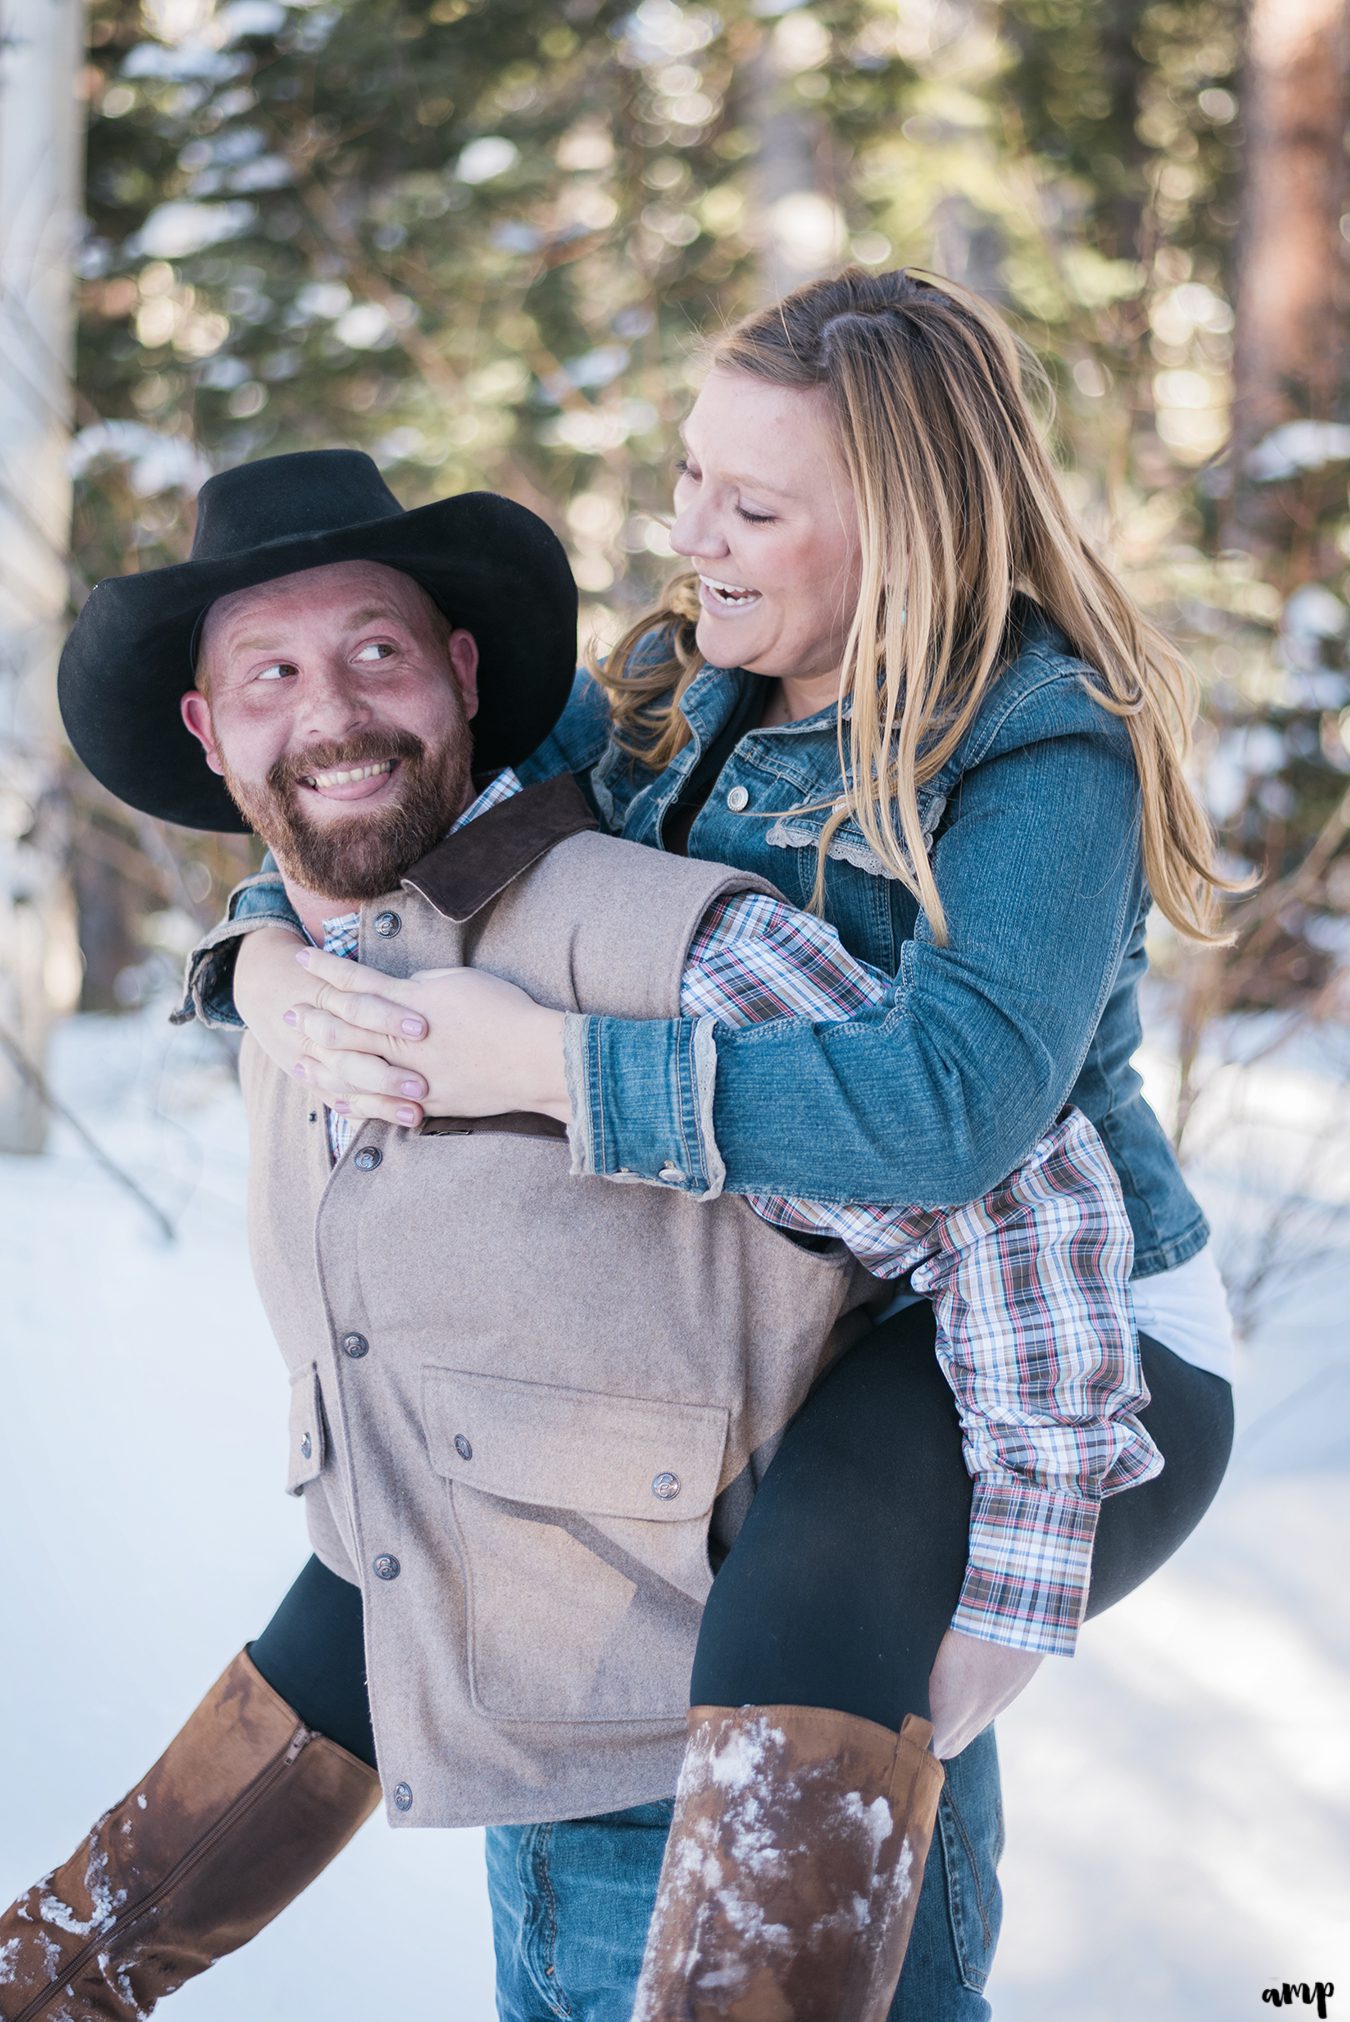 Engaged couple in piggy back ride laughing at each other